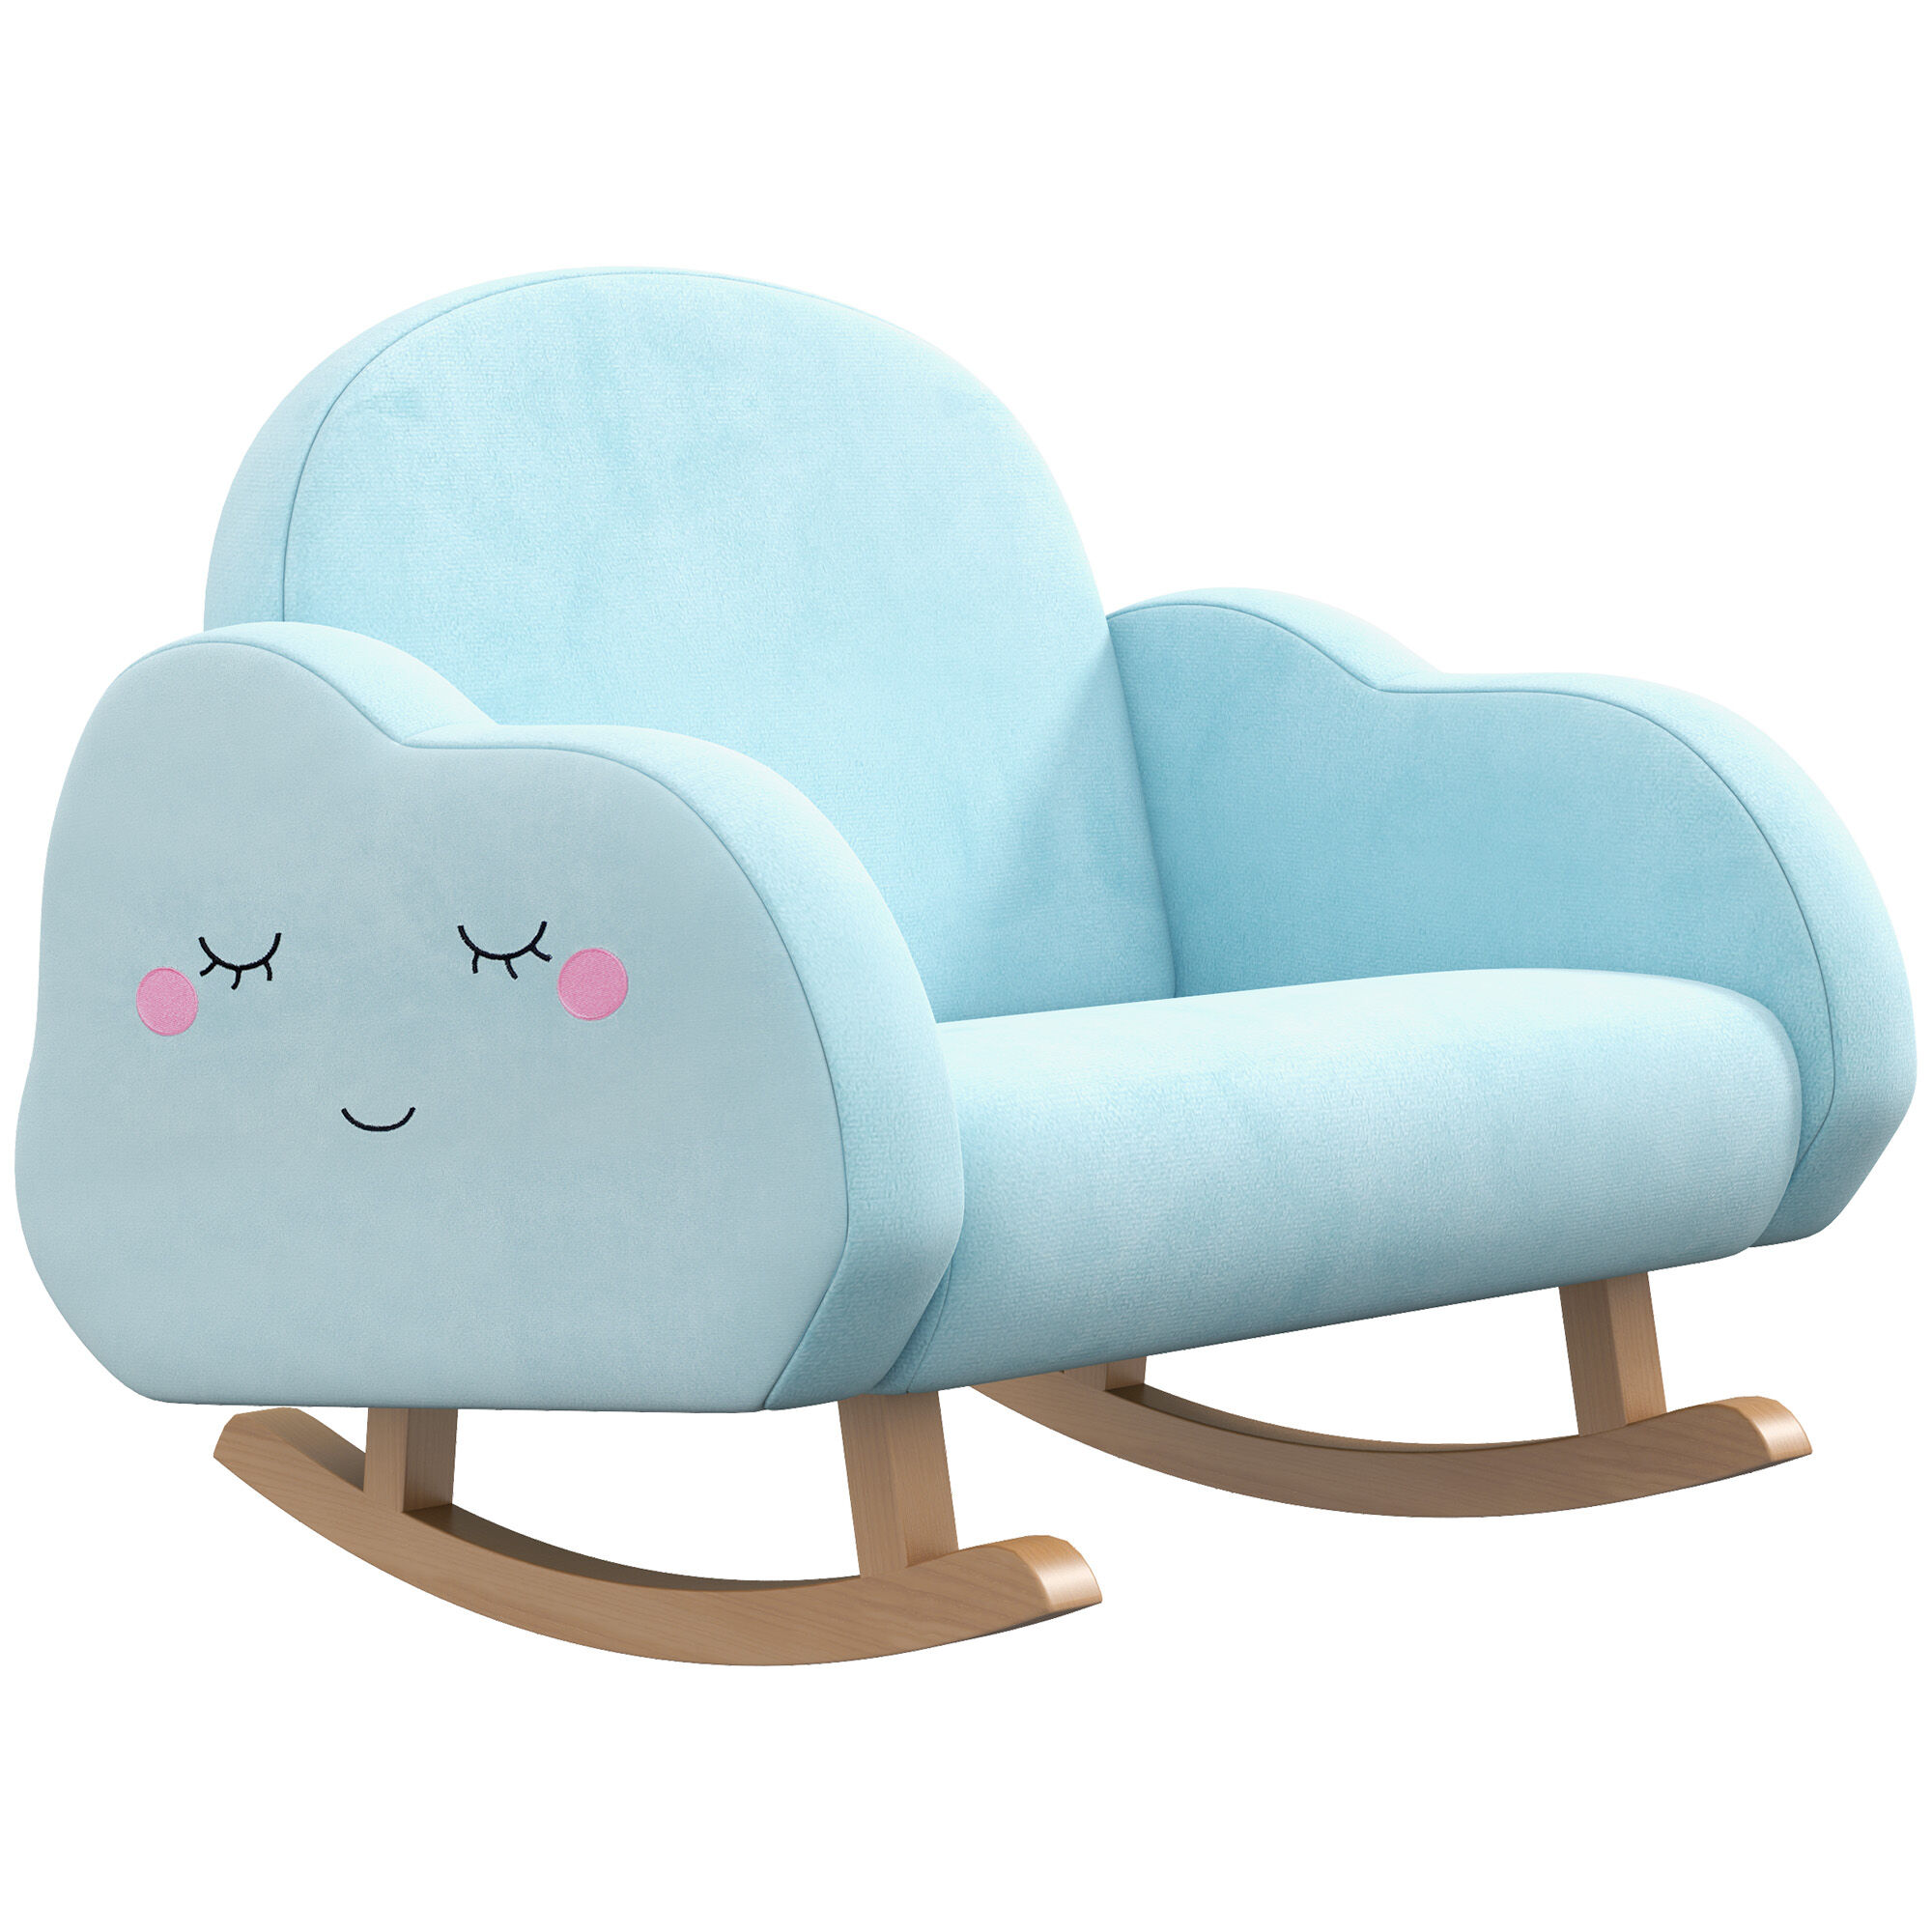 Qaba Blue Toddler Rocking Chair Kids Sofa Rocker Armchair for Nursery and Playroom Safe and Comfortable for Children 1.5-5 Years   Aosom.com